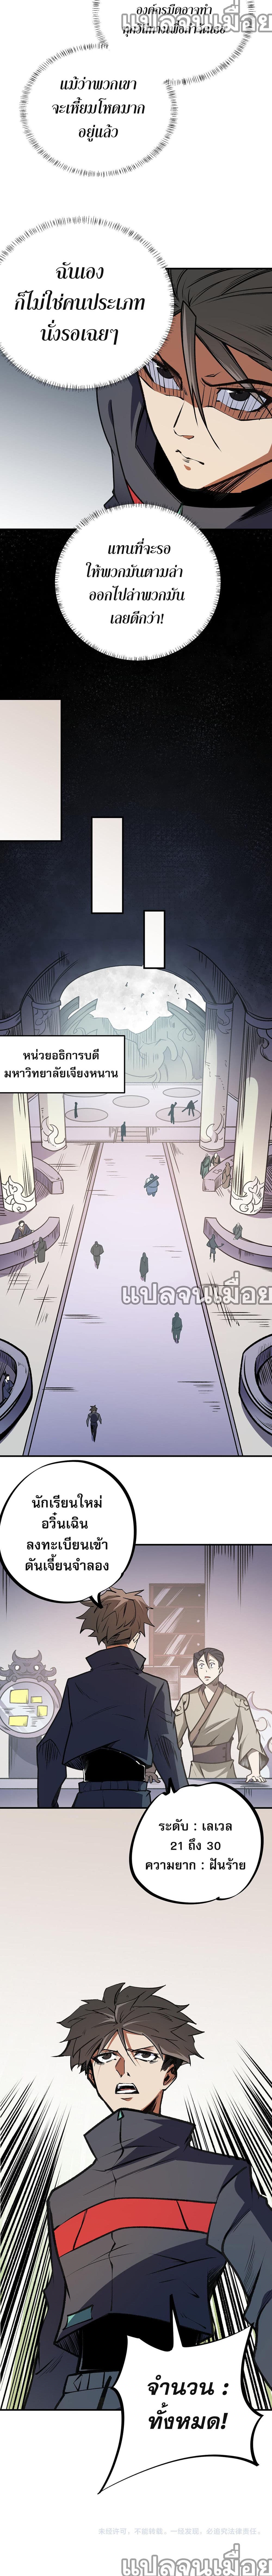 Job Changing for the Entire Population: The Jobless Me Will Terminate the Gods ฉันคือผู้เล่นไร้อาชีพที่สังหารเหล่าเทพ 48-48